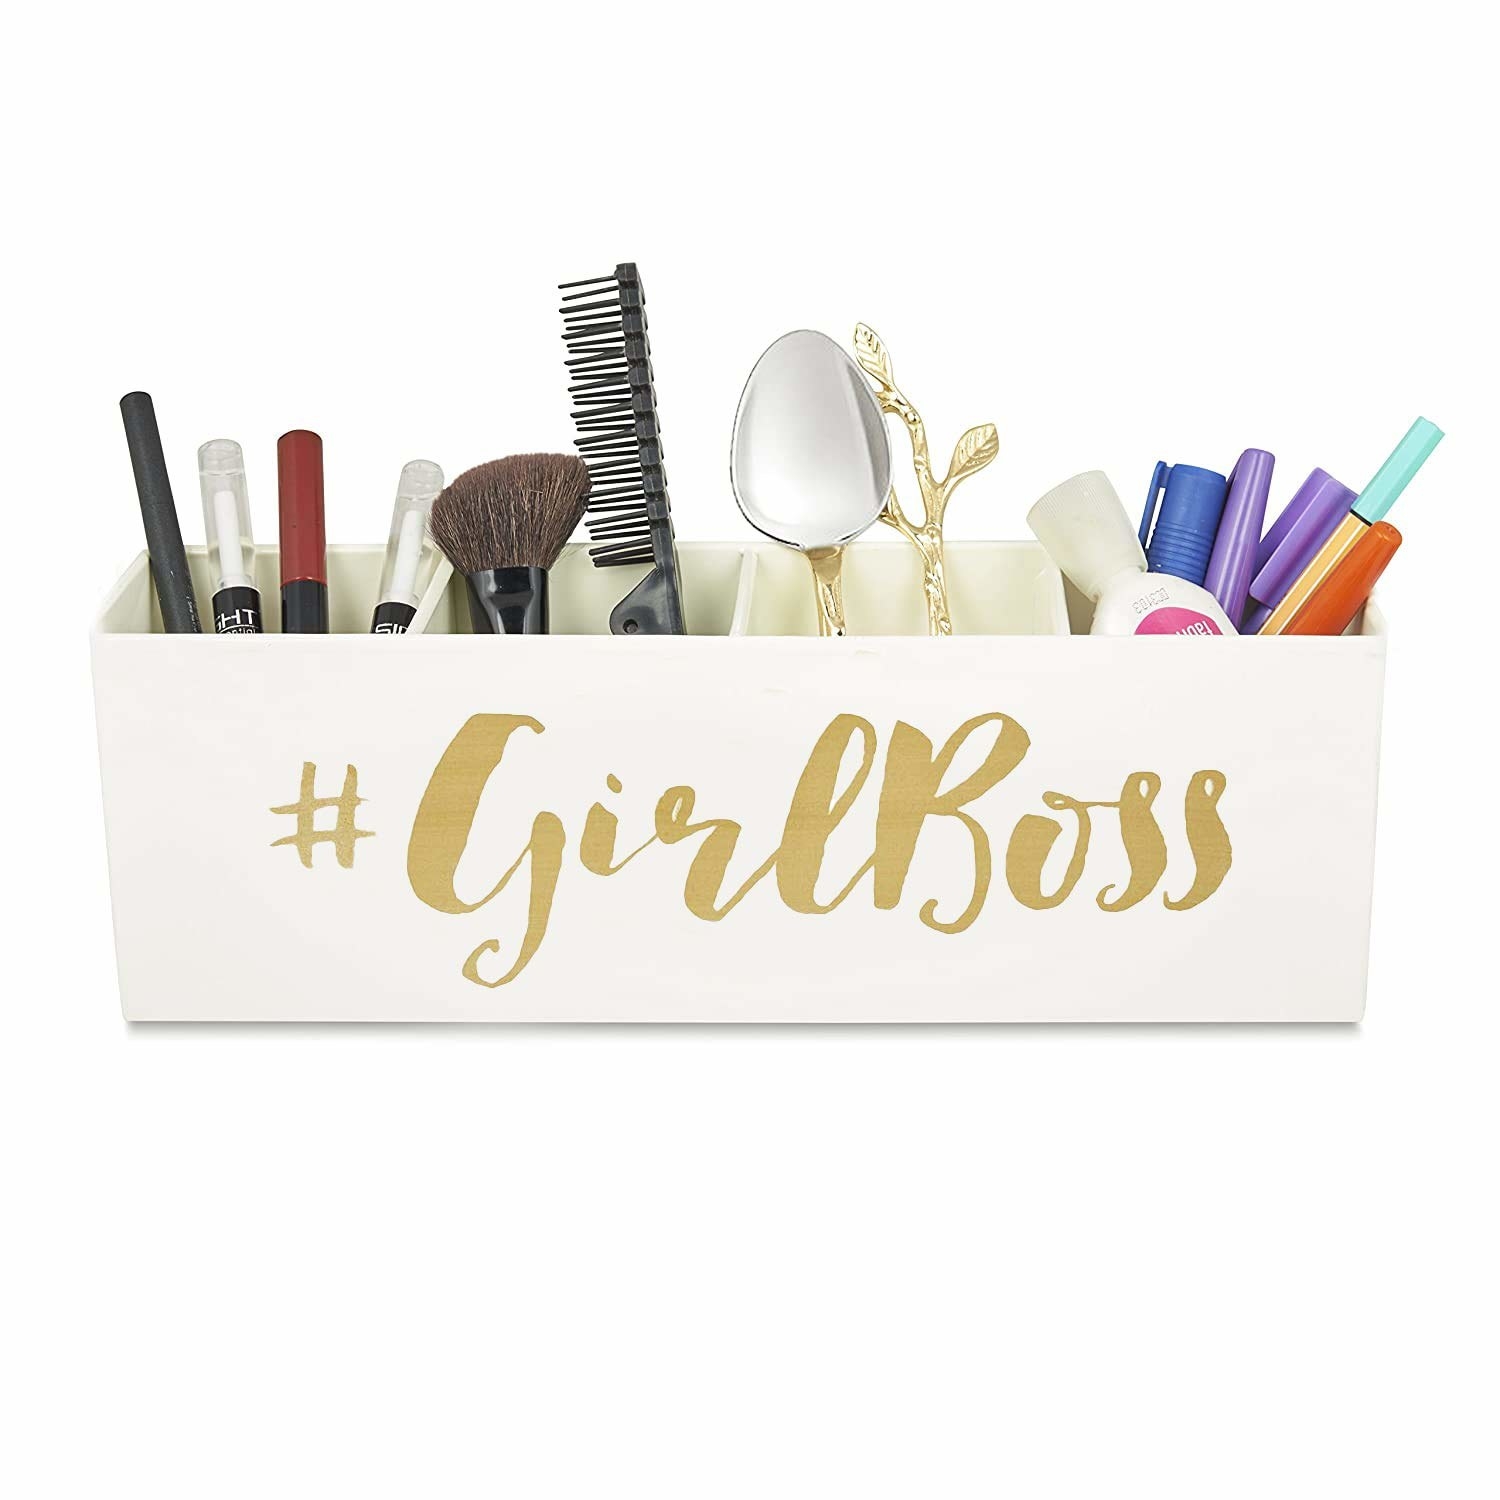 A white desk organiser with items in it and the text #GirlBoss written on it.